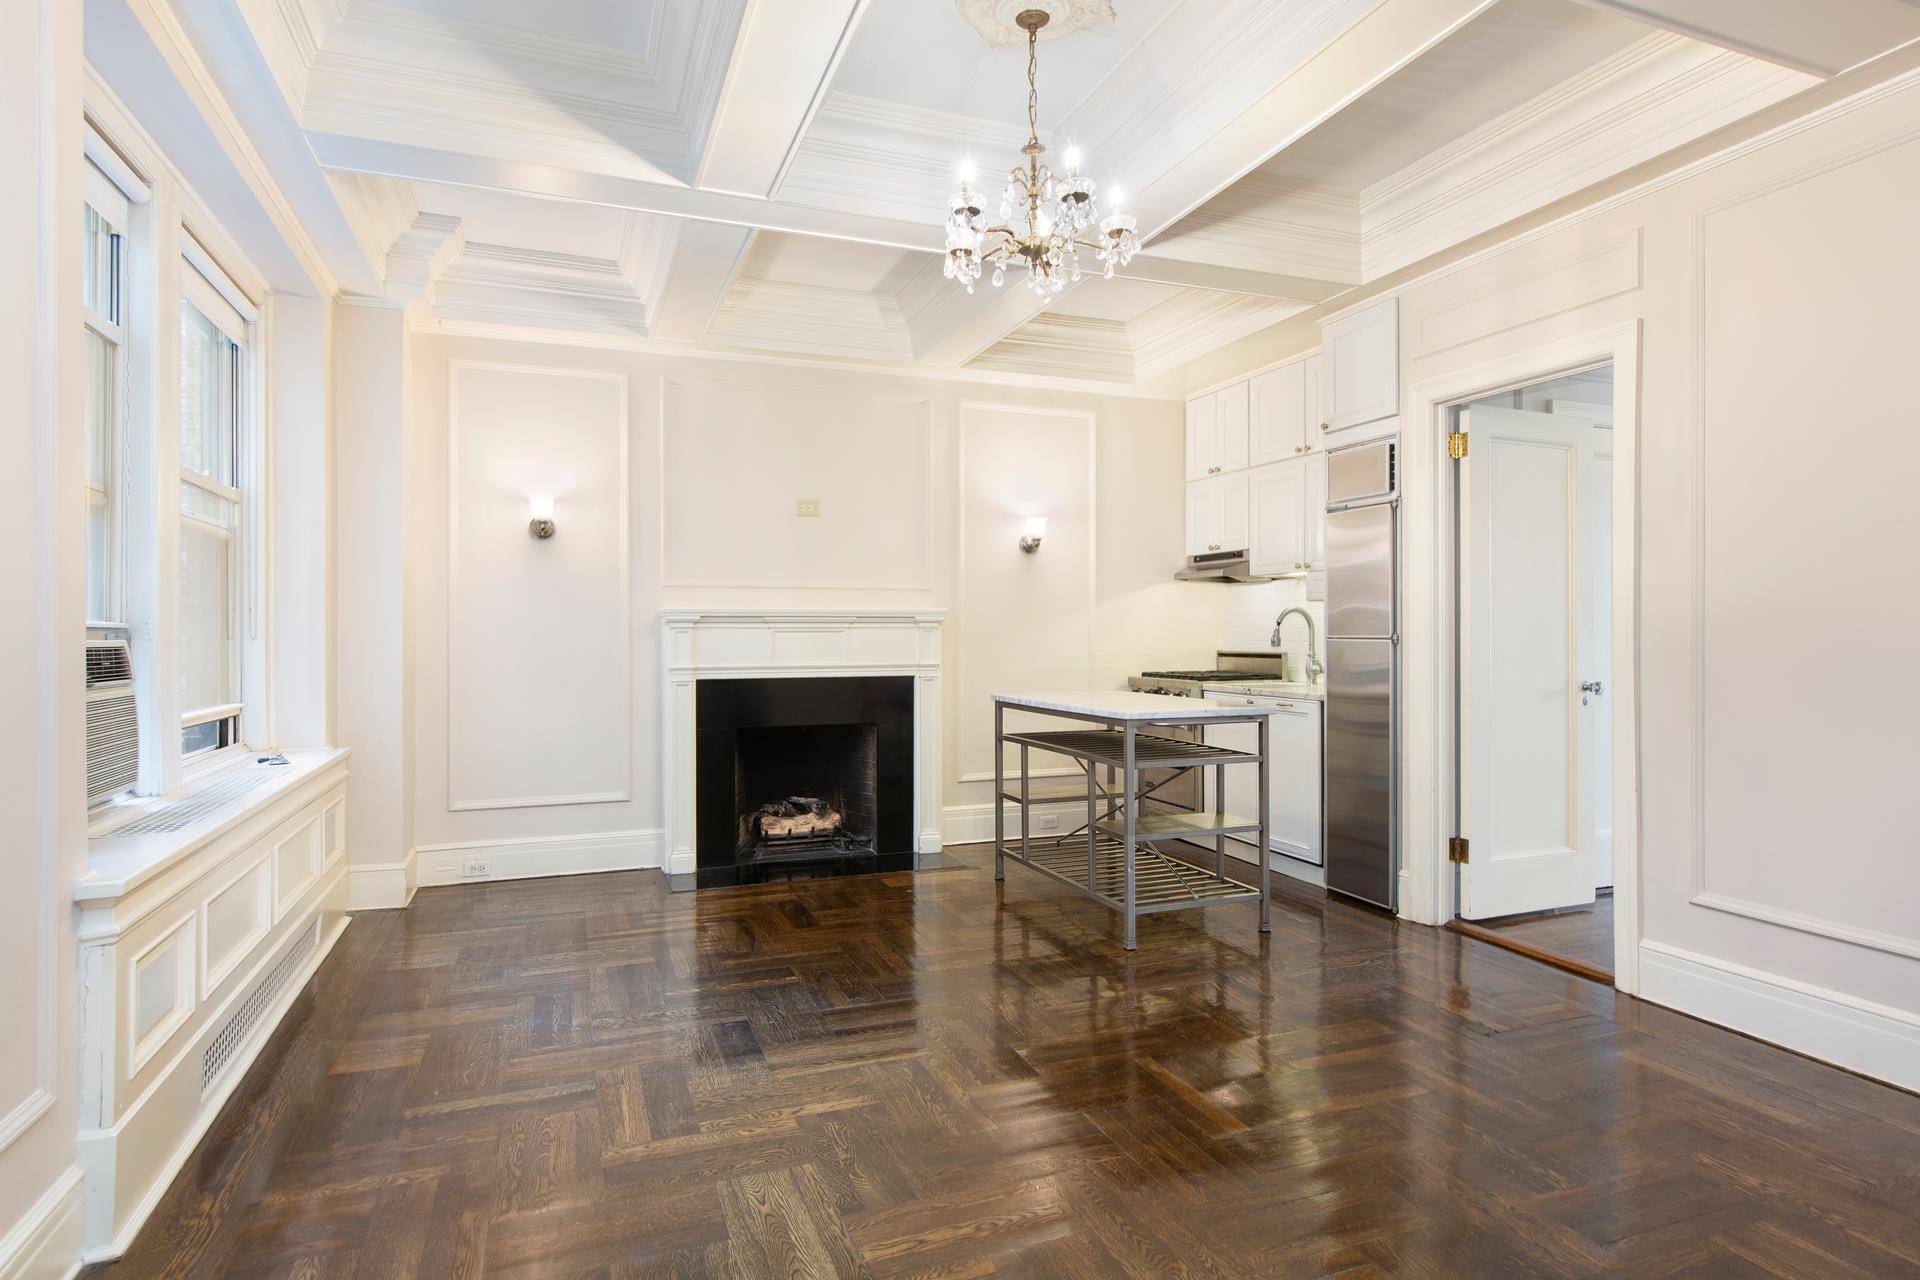 Such a beauty, this stunning one bedroom apartment, so true to its elegant prewar style, is as move in ready as can be.